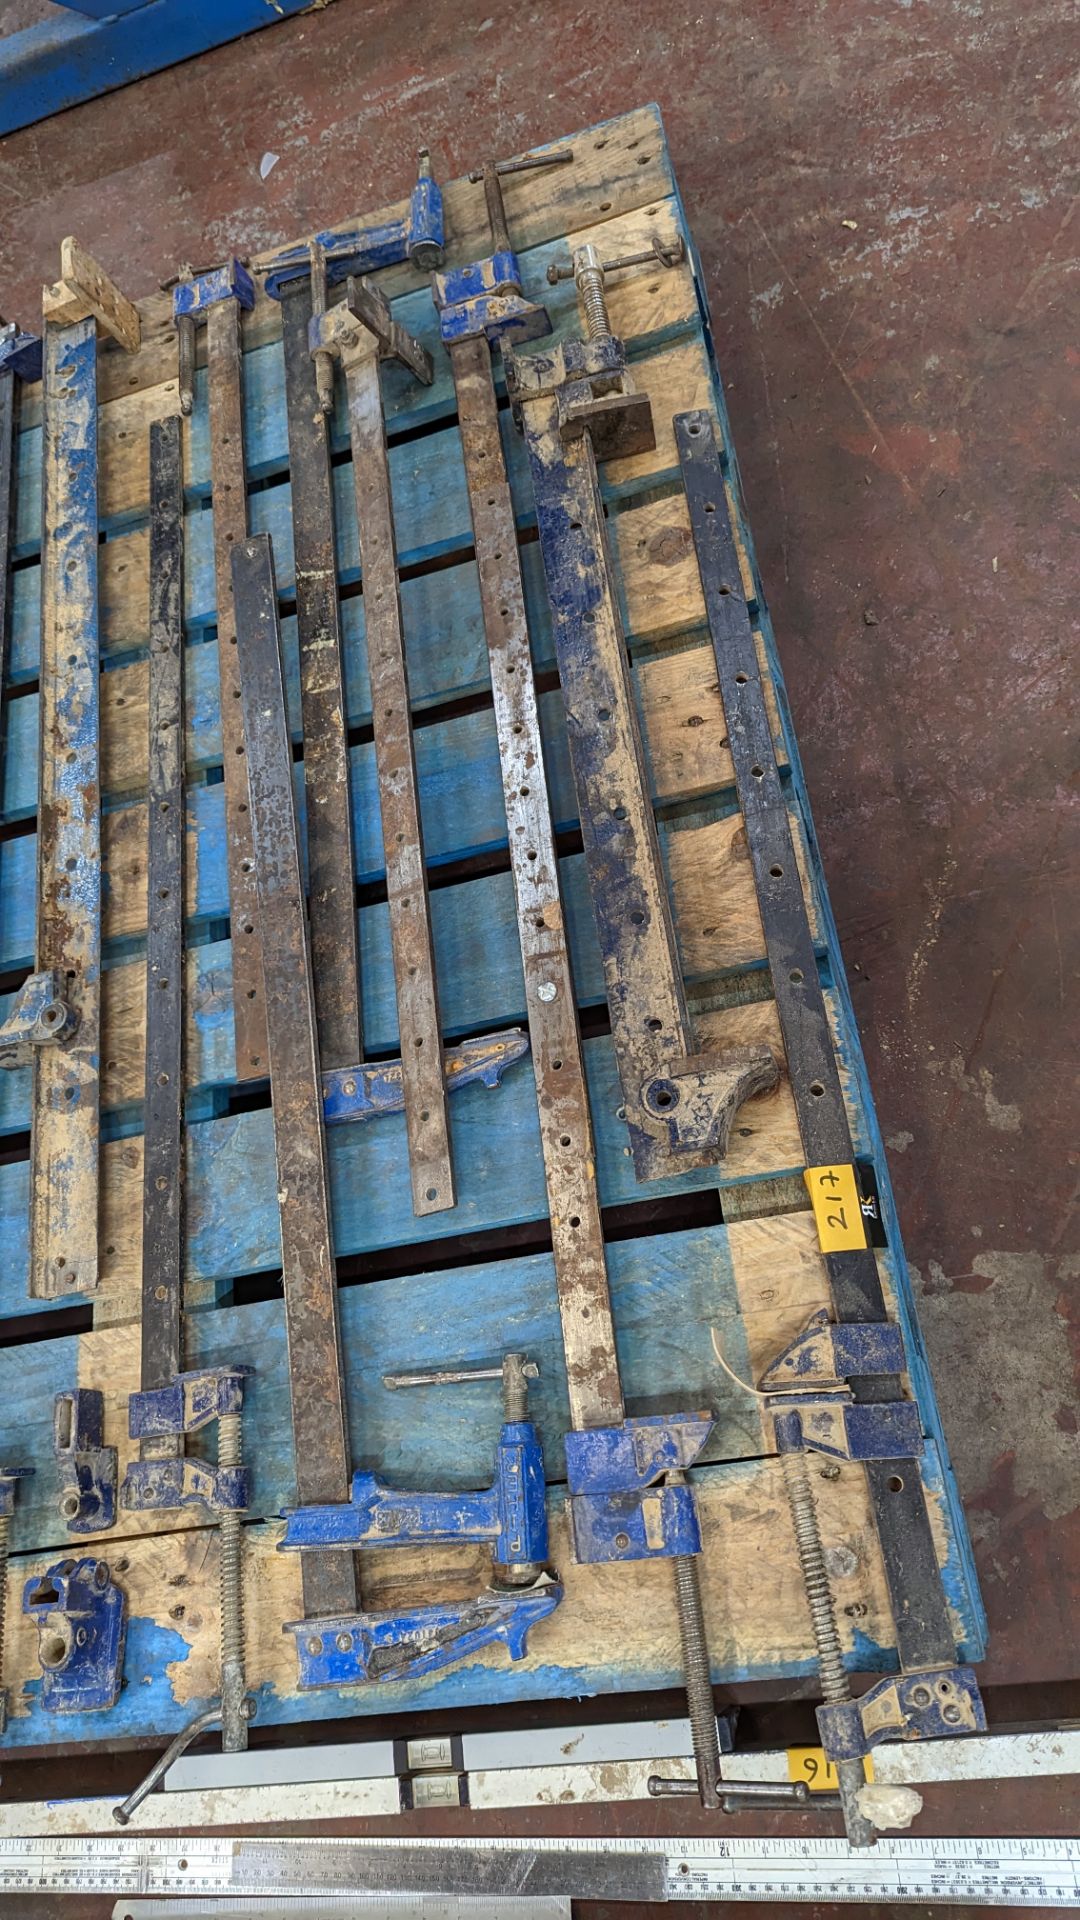 The contents of a pallet of metal clamps - Image 4 of 6